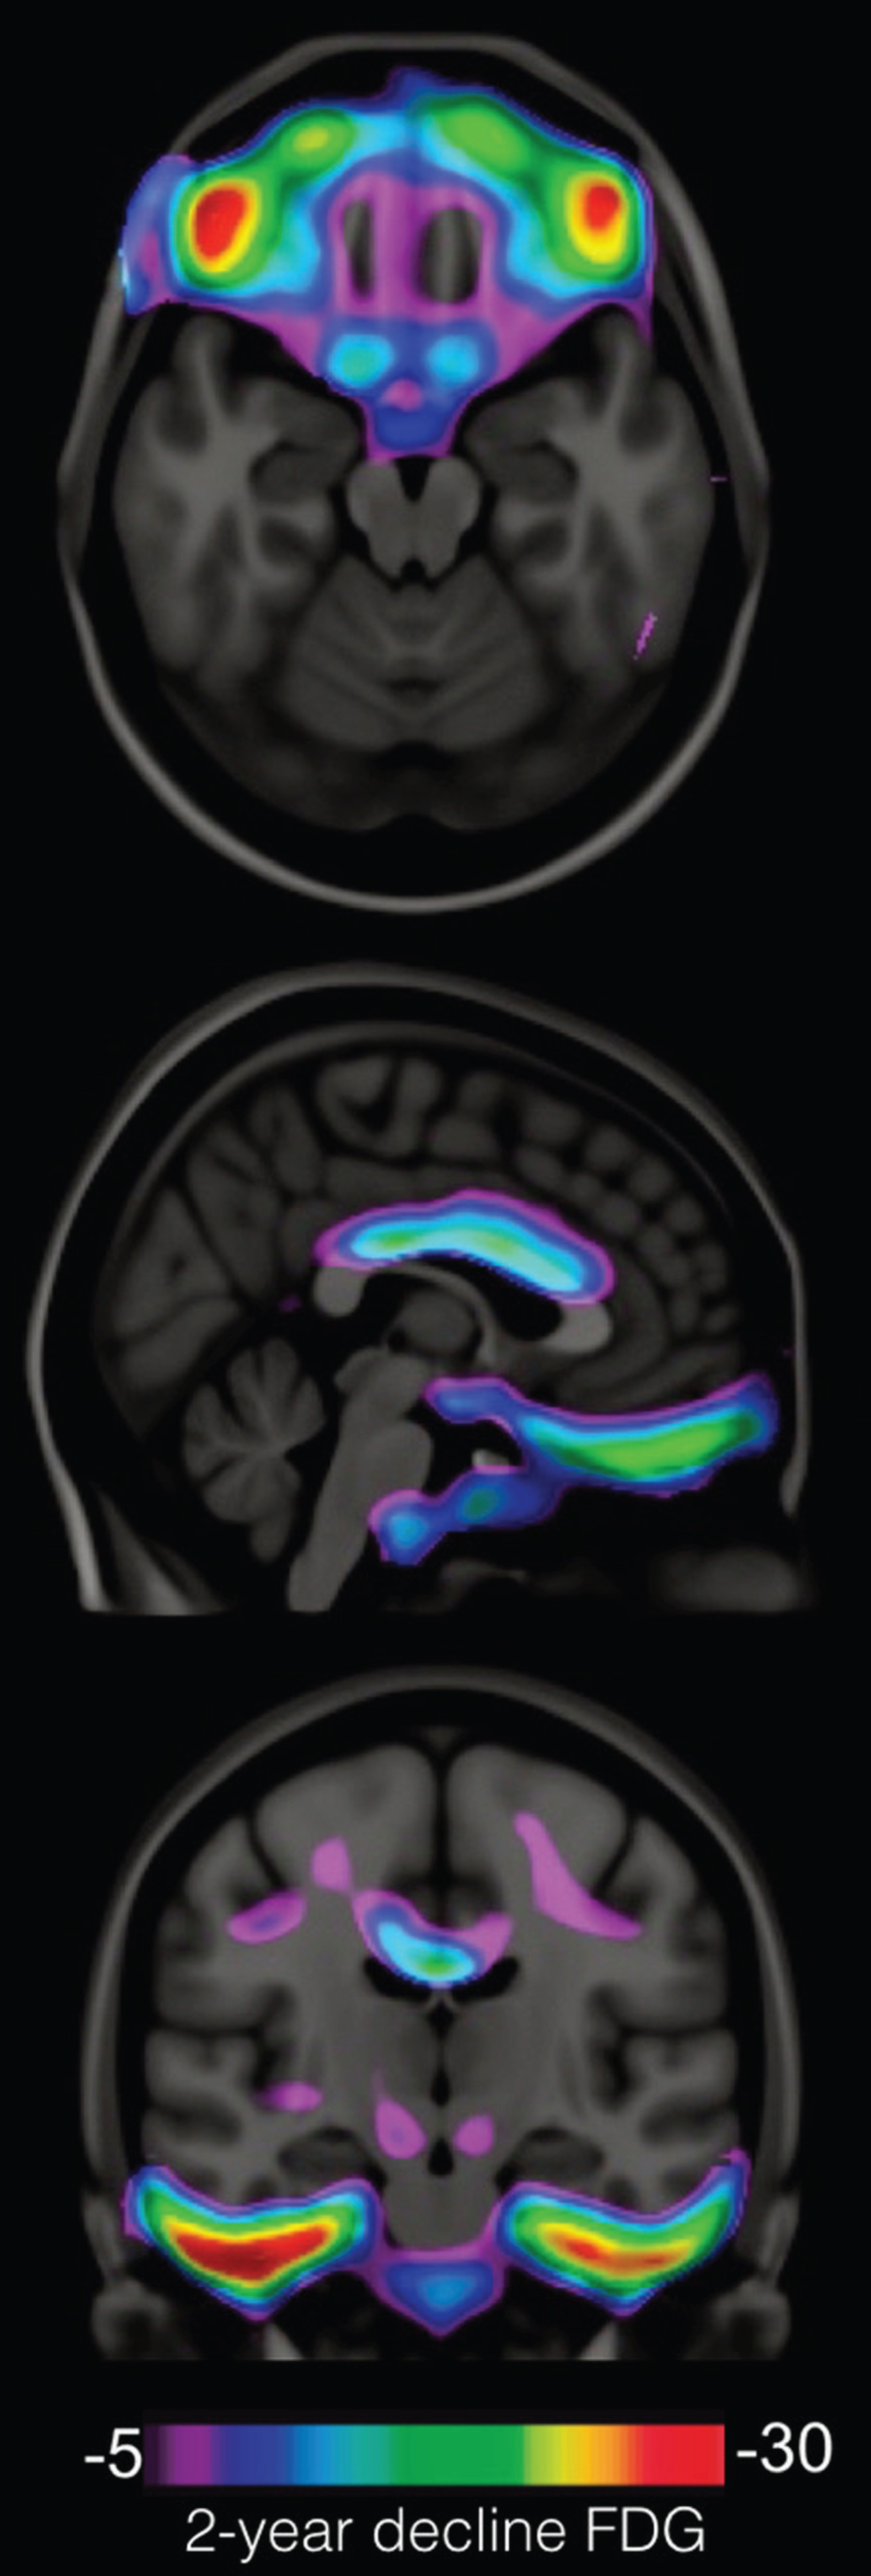 Brain regions vulnerable to the synergy between Aβ and tau in cognitively normal persons. The parametric map, overlaid in a structural MRI, revealed regions where 2-year [18F]FDG metabolic decline was associated with the synergistic effect between Aβ and tau in cognitively normal elderly individuals.